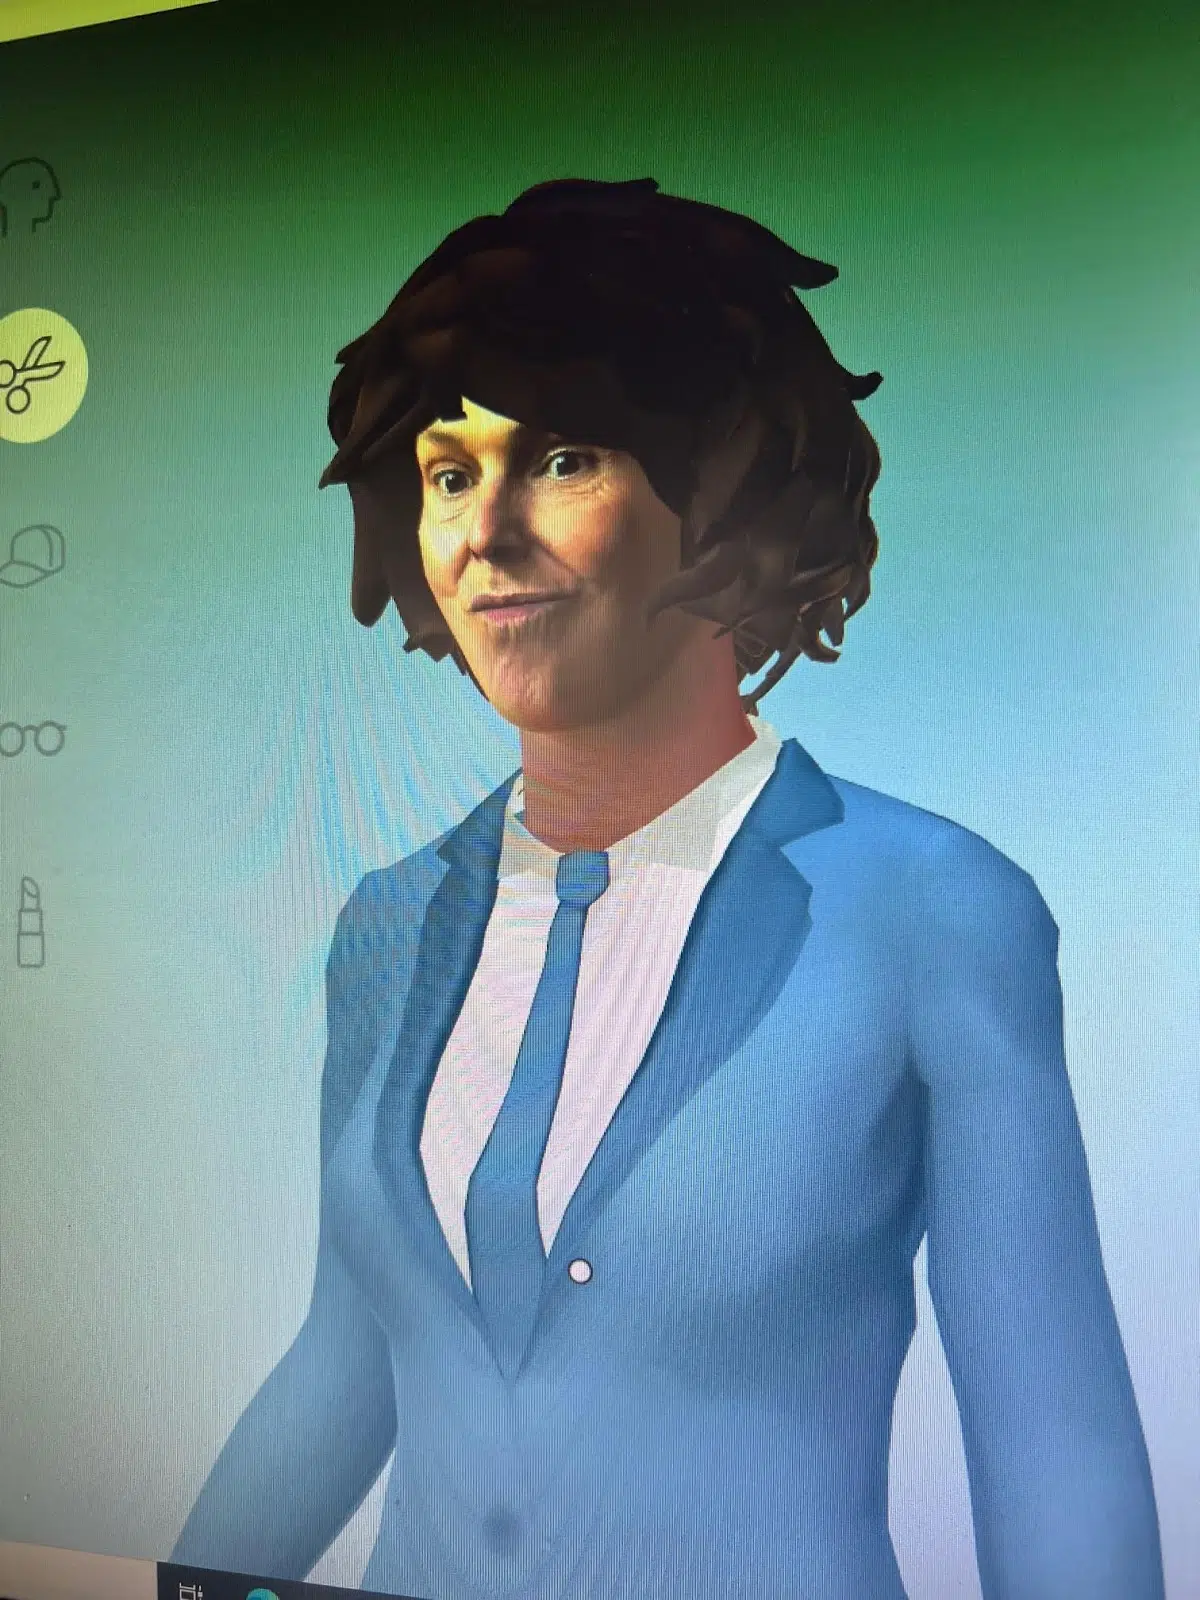 This monstrosity was the outcome of the Ready Player Me "add your photo" capability allowing users to model their avatar's facial features on an actual photo.